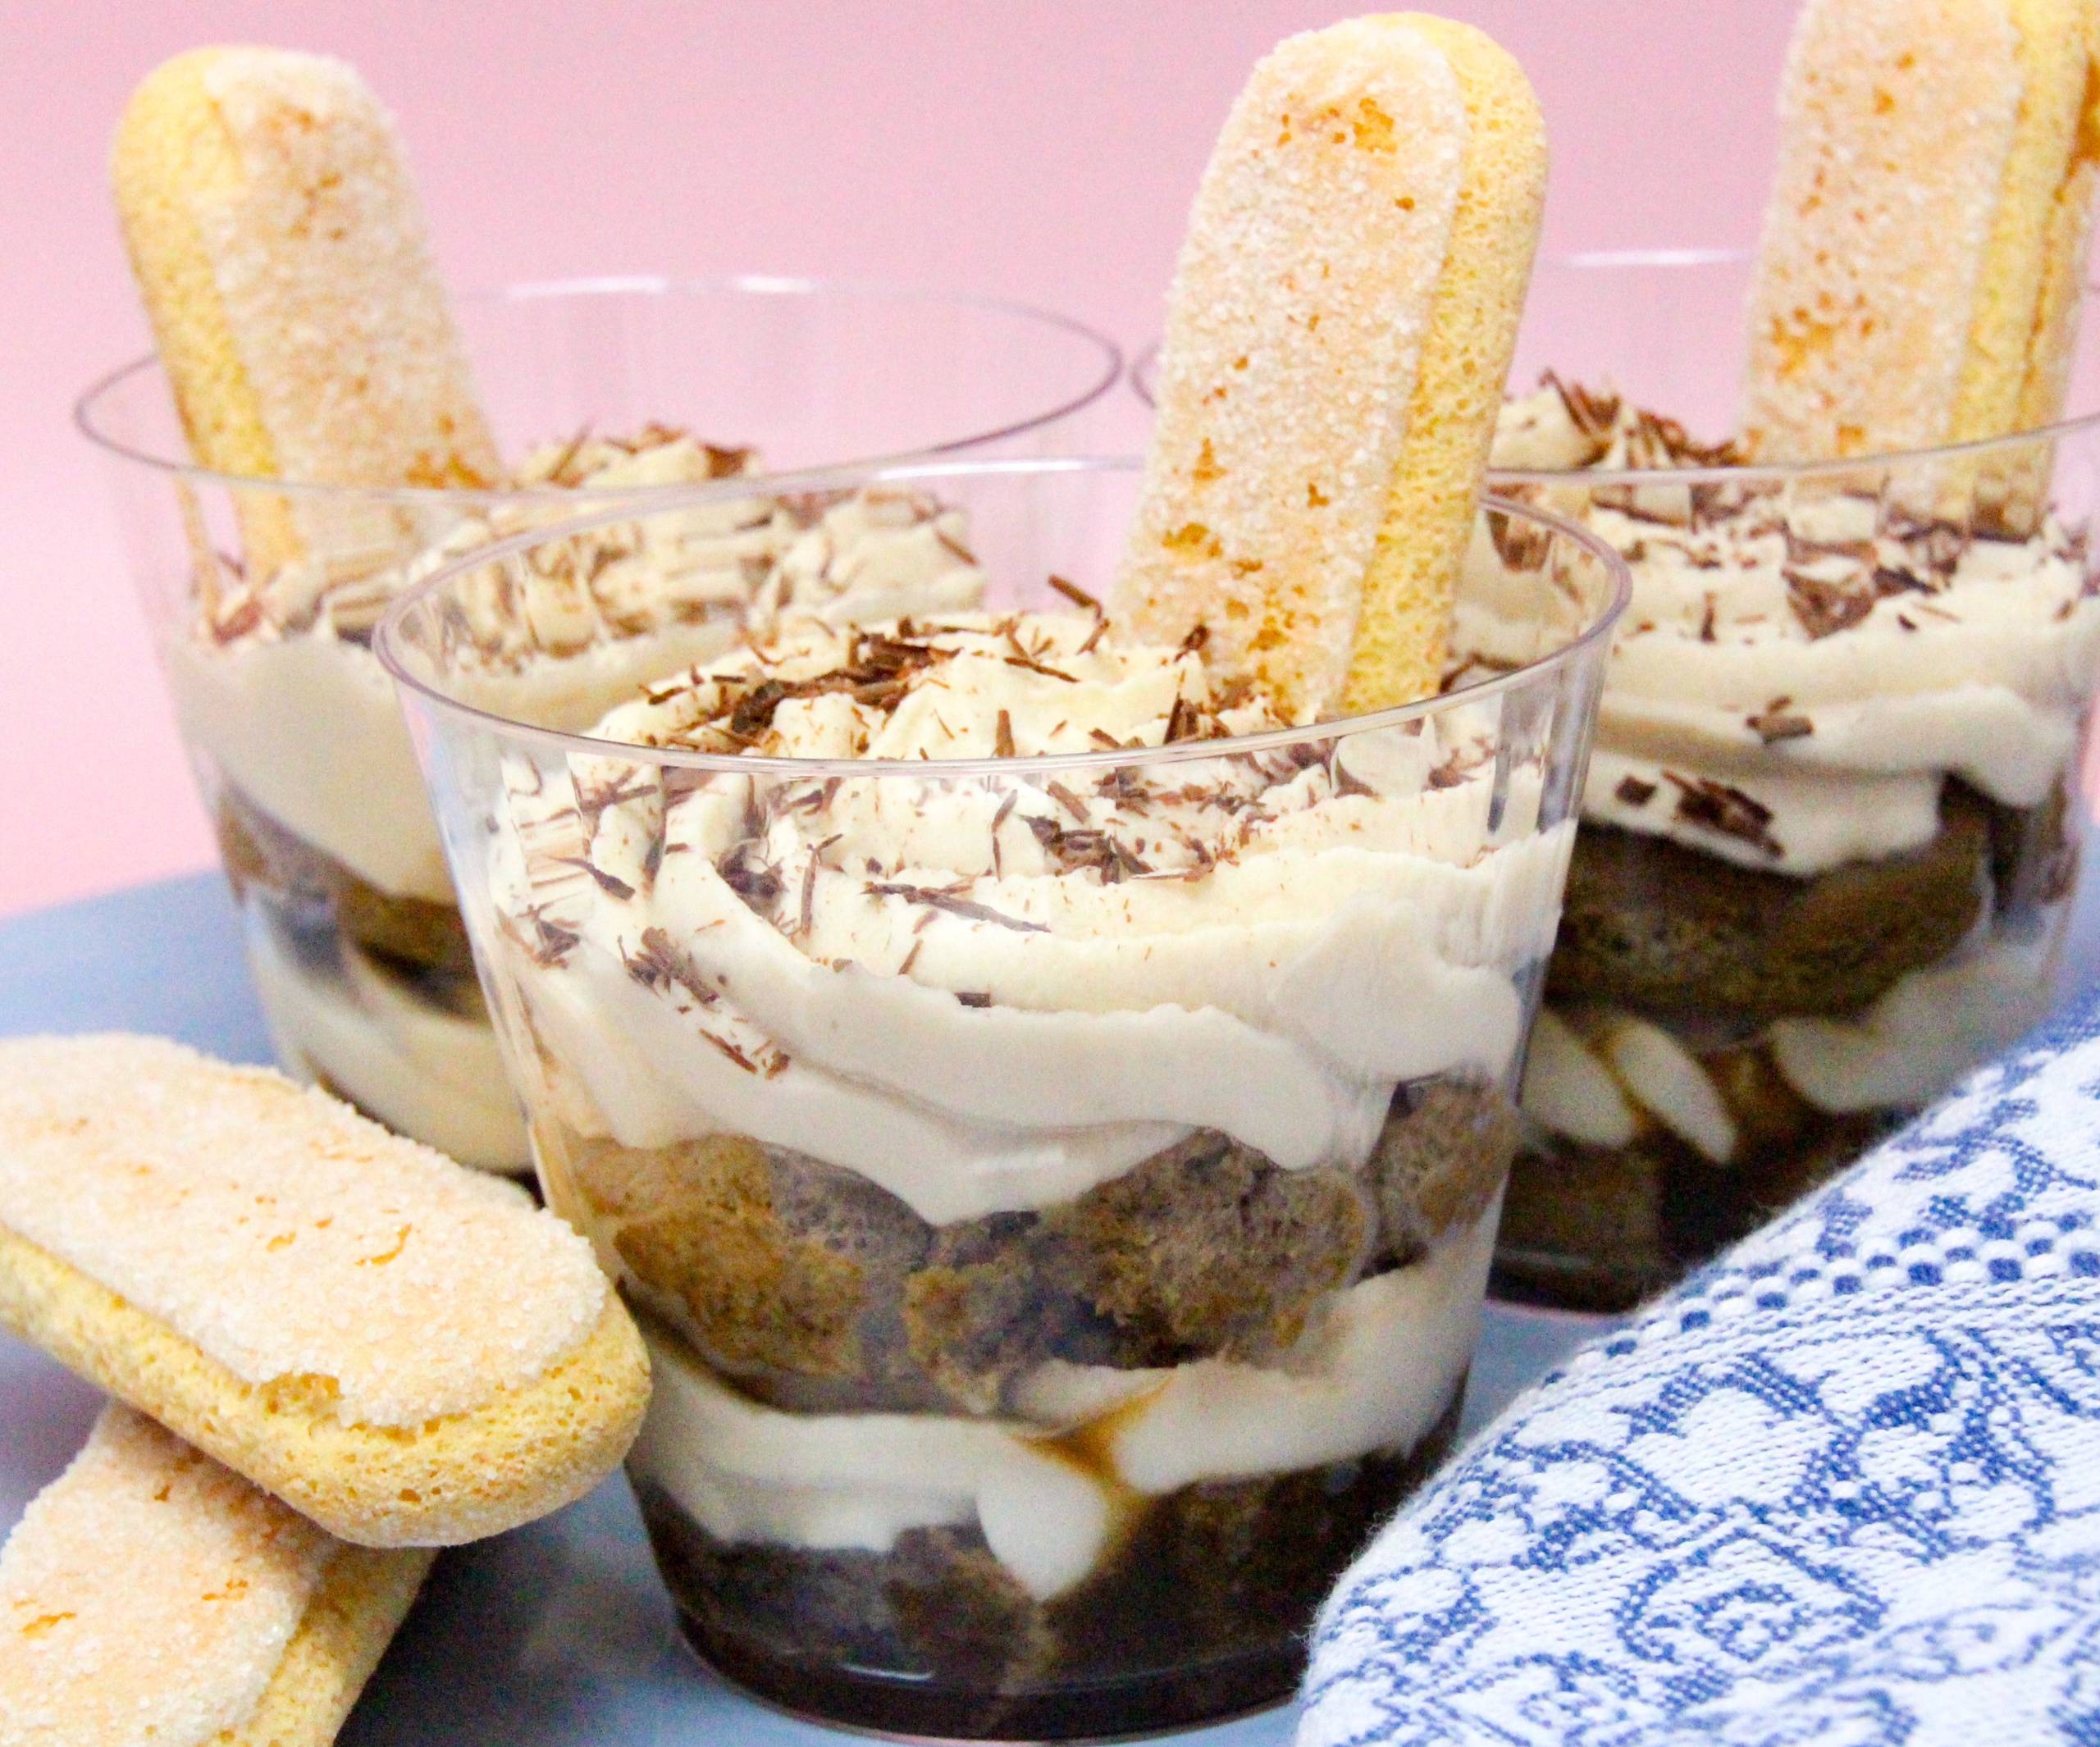 With yummy layers of coffee-dipped ladyfingers, Kahlúa-flavored mascarpone cheese, and whipped cream, your guests will be wowed by these mini Tiramisu Parfaits! Recipe shared with permission granted by Maya Corrigan, author of A PARFAIT CRIME. 